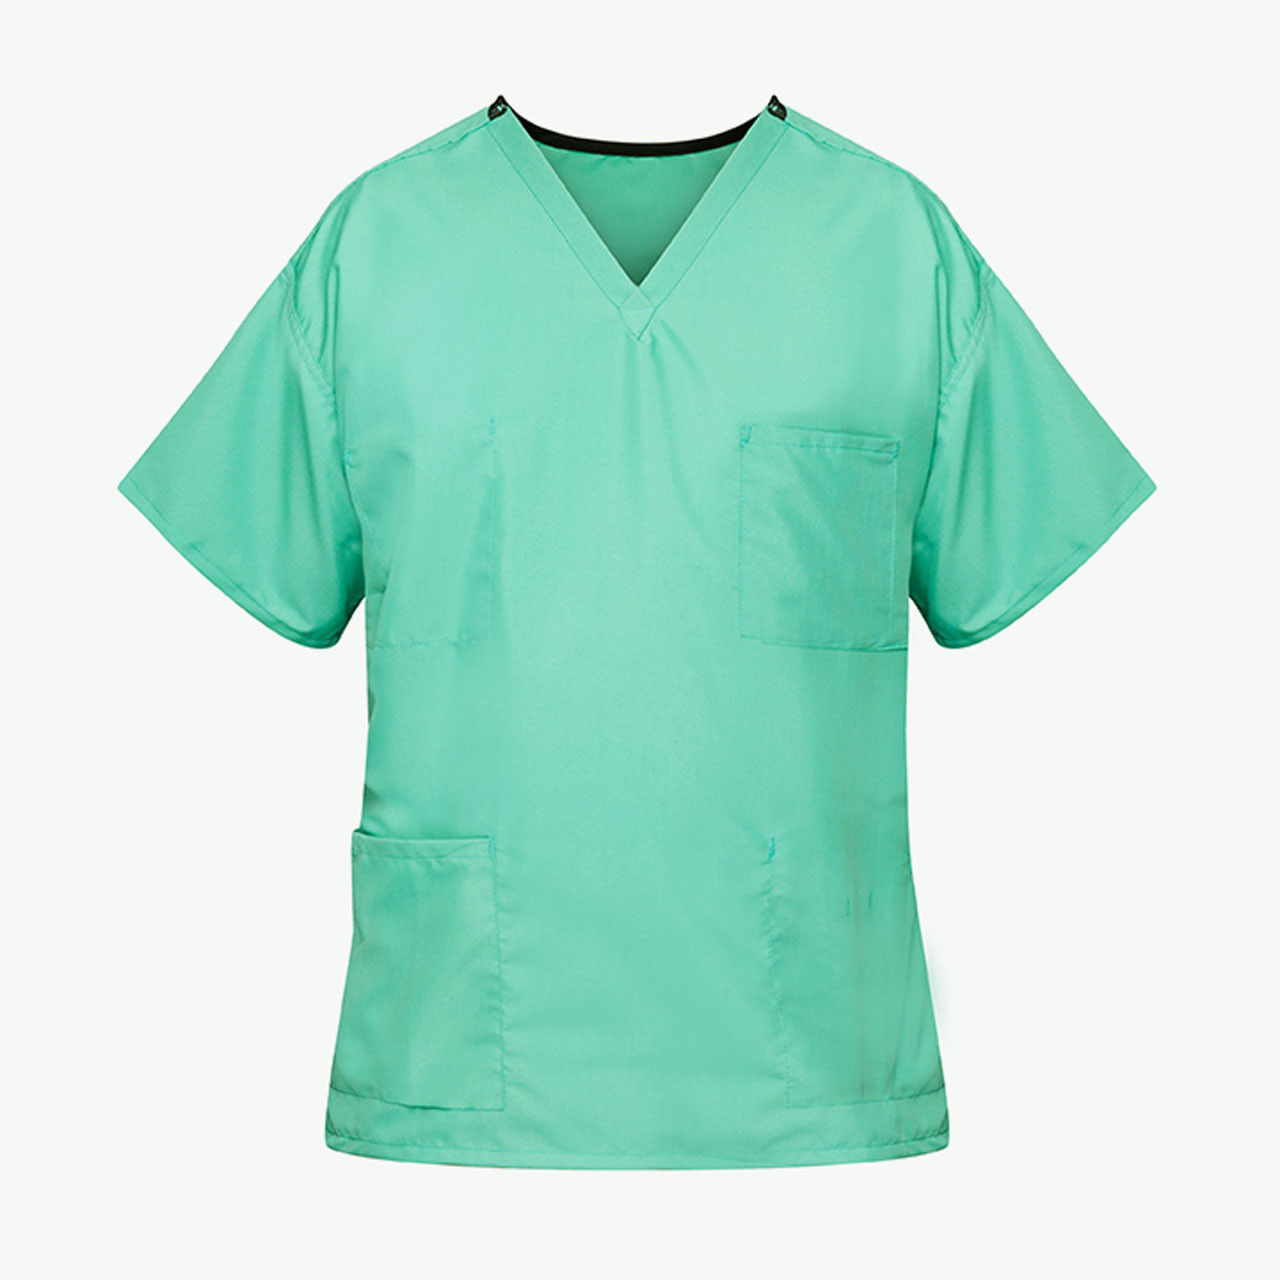 What design feature is found in these Unisex Reversible Jade Green Scrub Tops?